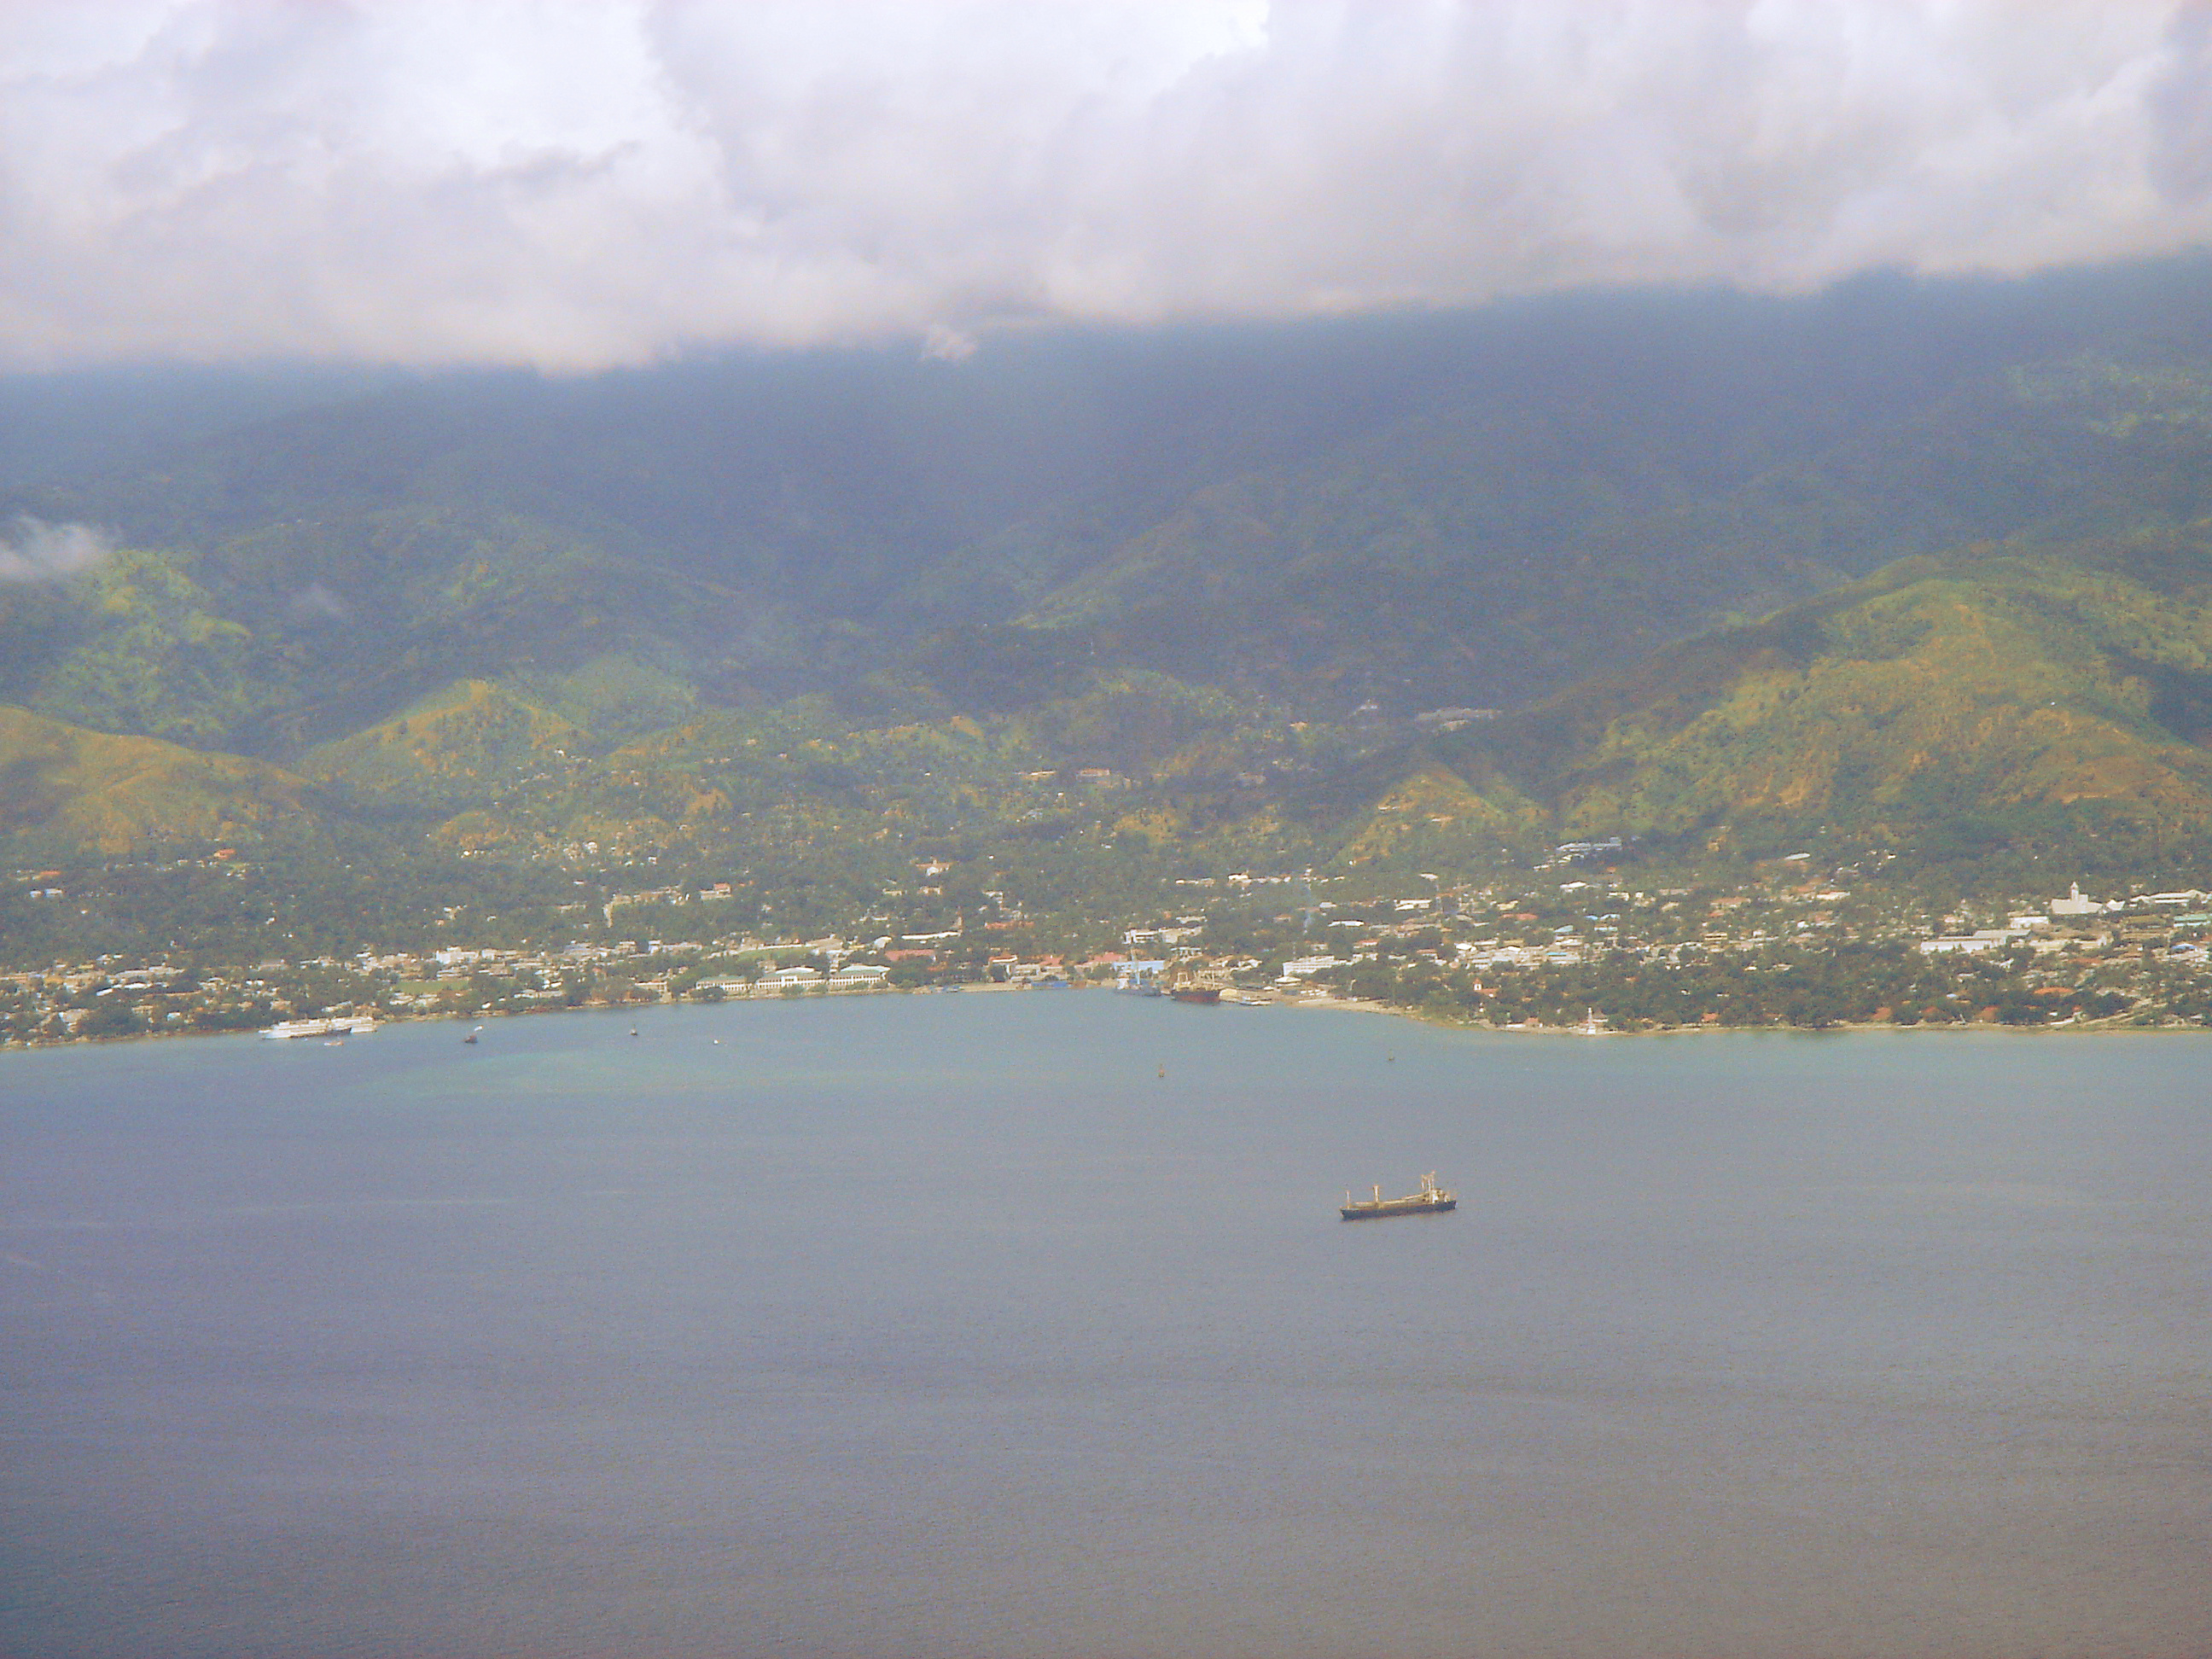 The Places of East Timor - East Timor's capital Dili from Air